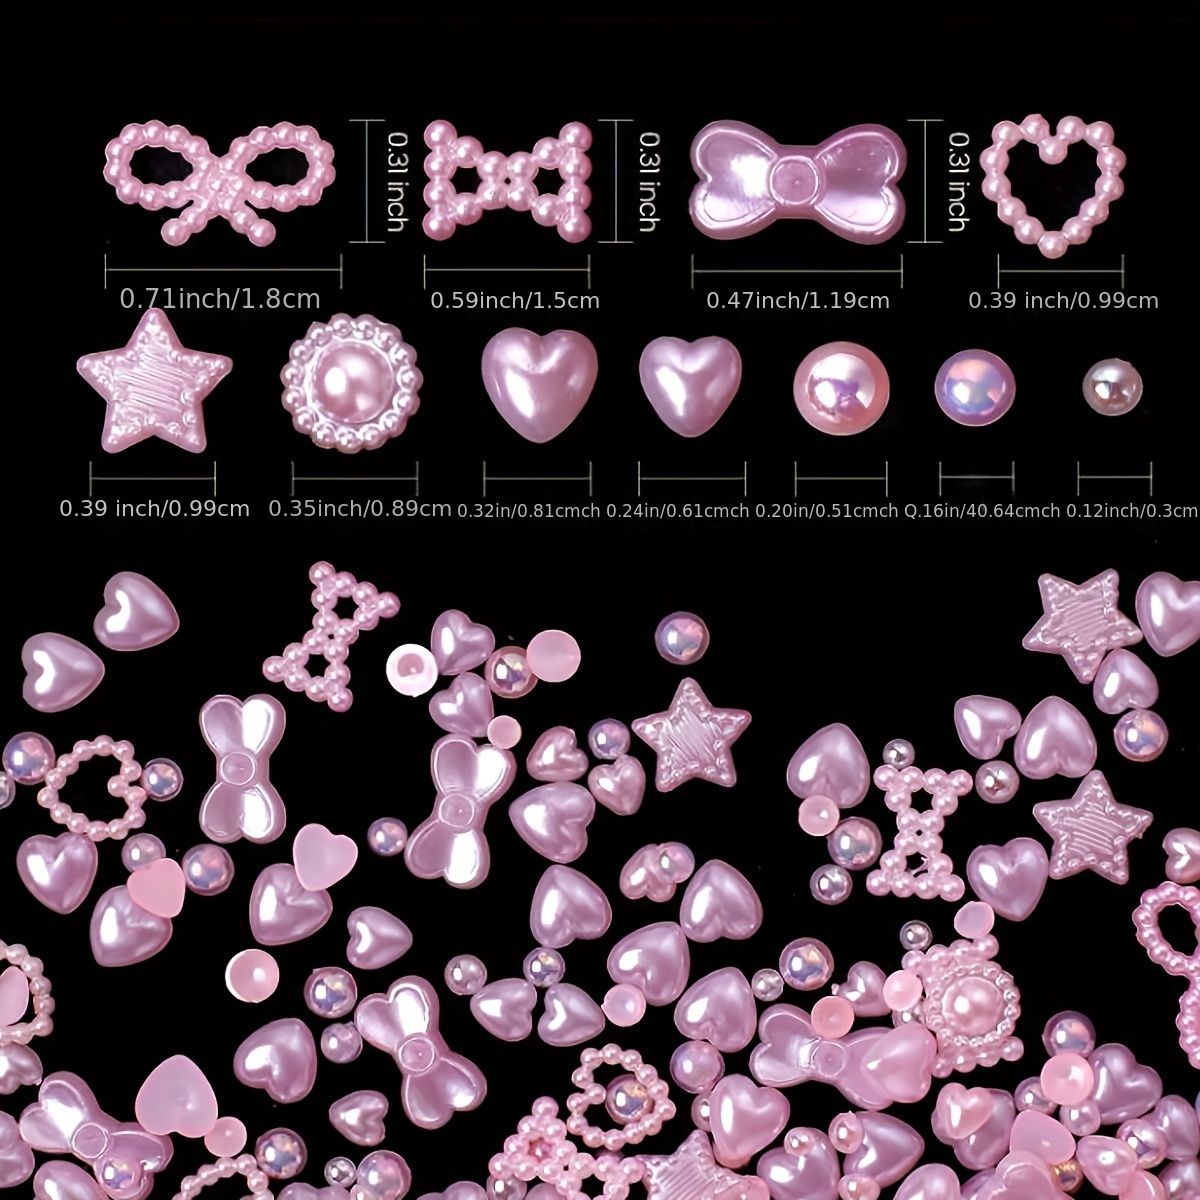  3D Assorted Nail Charms Purple Multi Shapes Heart